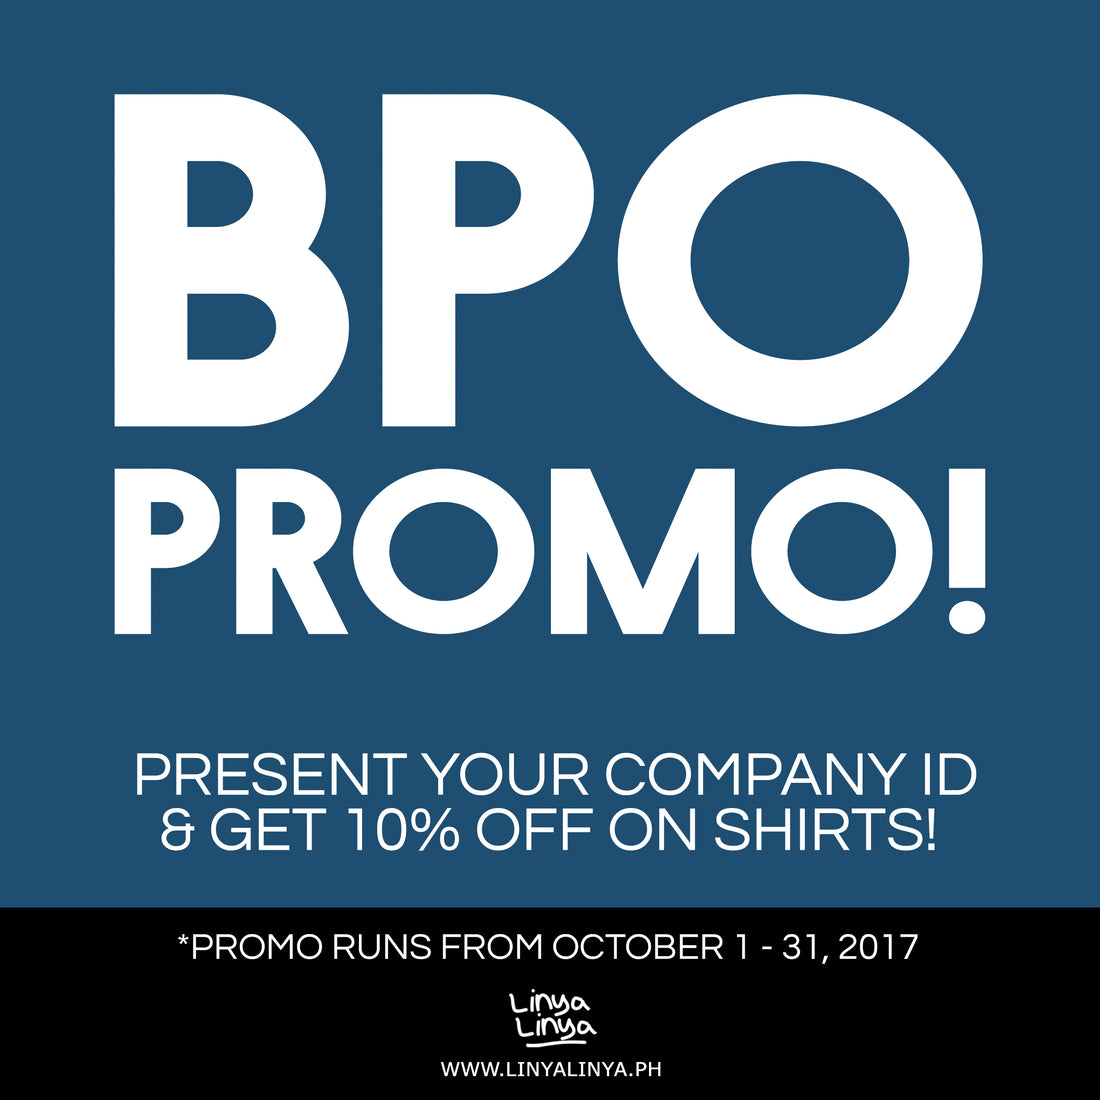 Are you from the BPO industry? We have an exclusive PROMO for you!